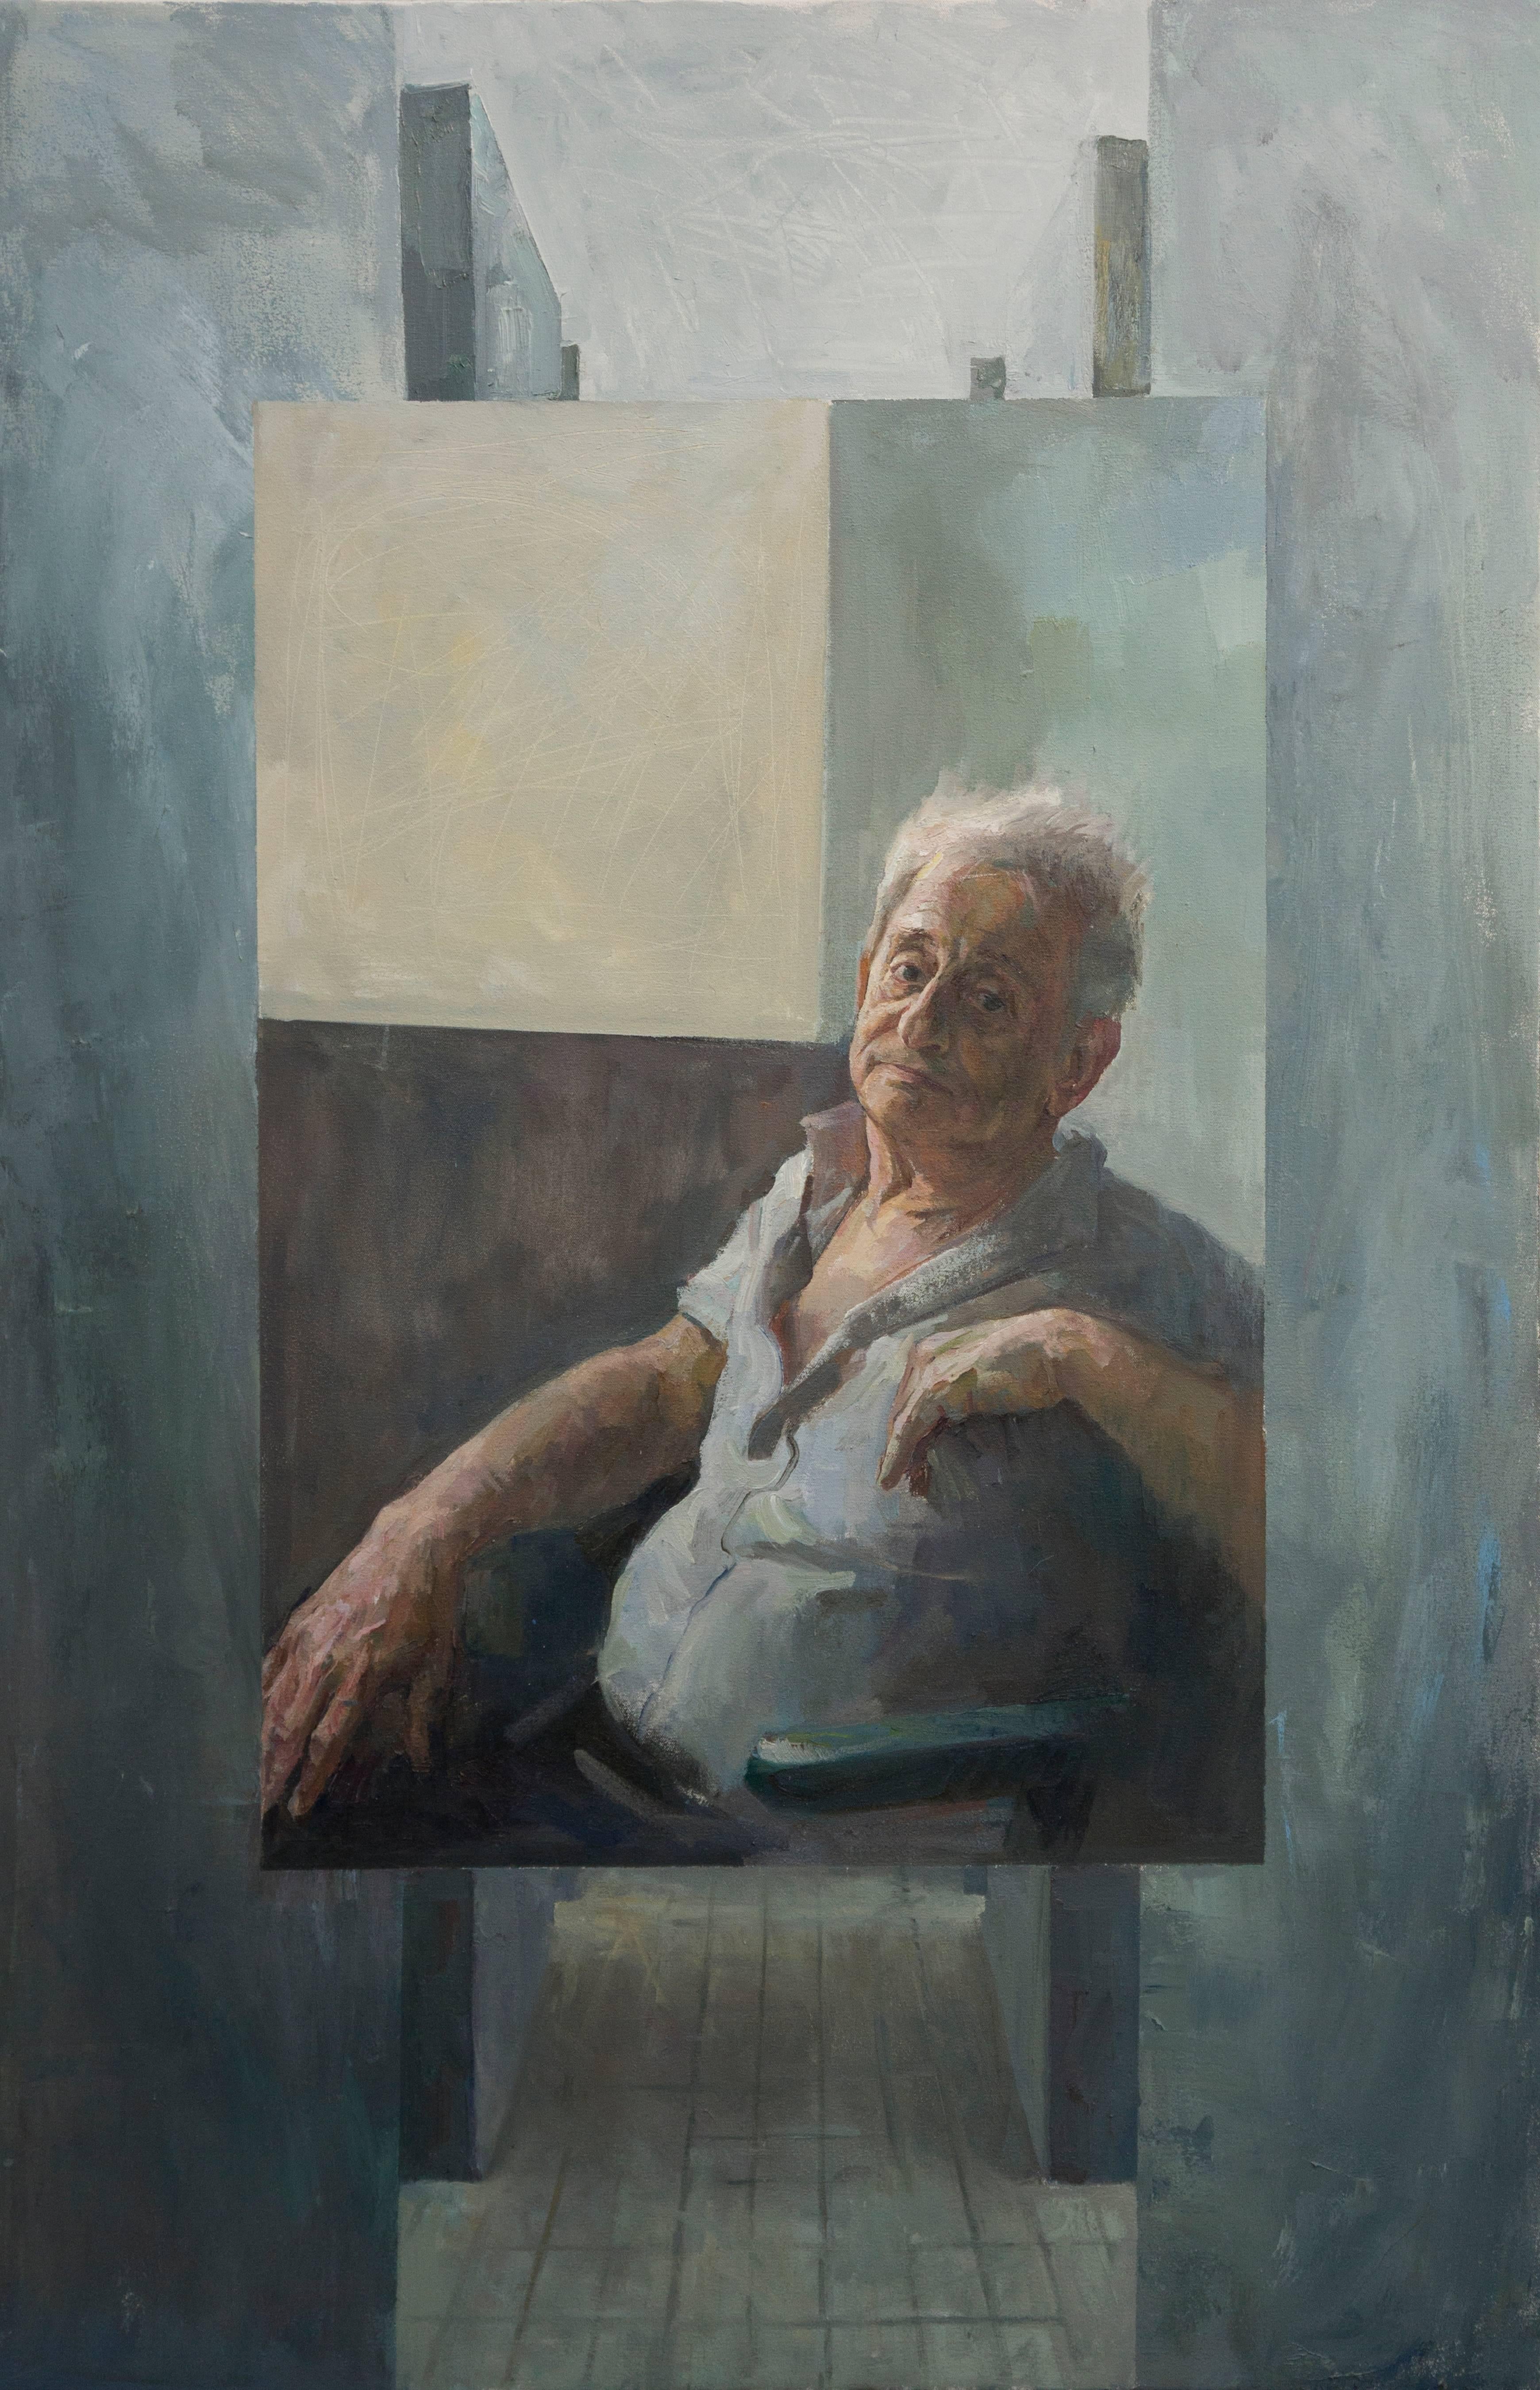 Iliya Mirochnik, "War is Simple like a Monument", 2014-15, 37in x 60in, oil on canvas
 
In Mirochnik's candid depiction of his paternal grandfather, War Is Simple like a Monument, time is, ironically, the most pervasive and invasive character. The